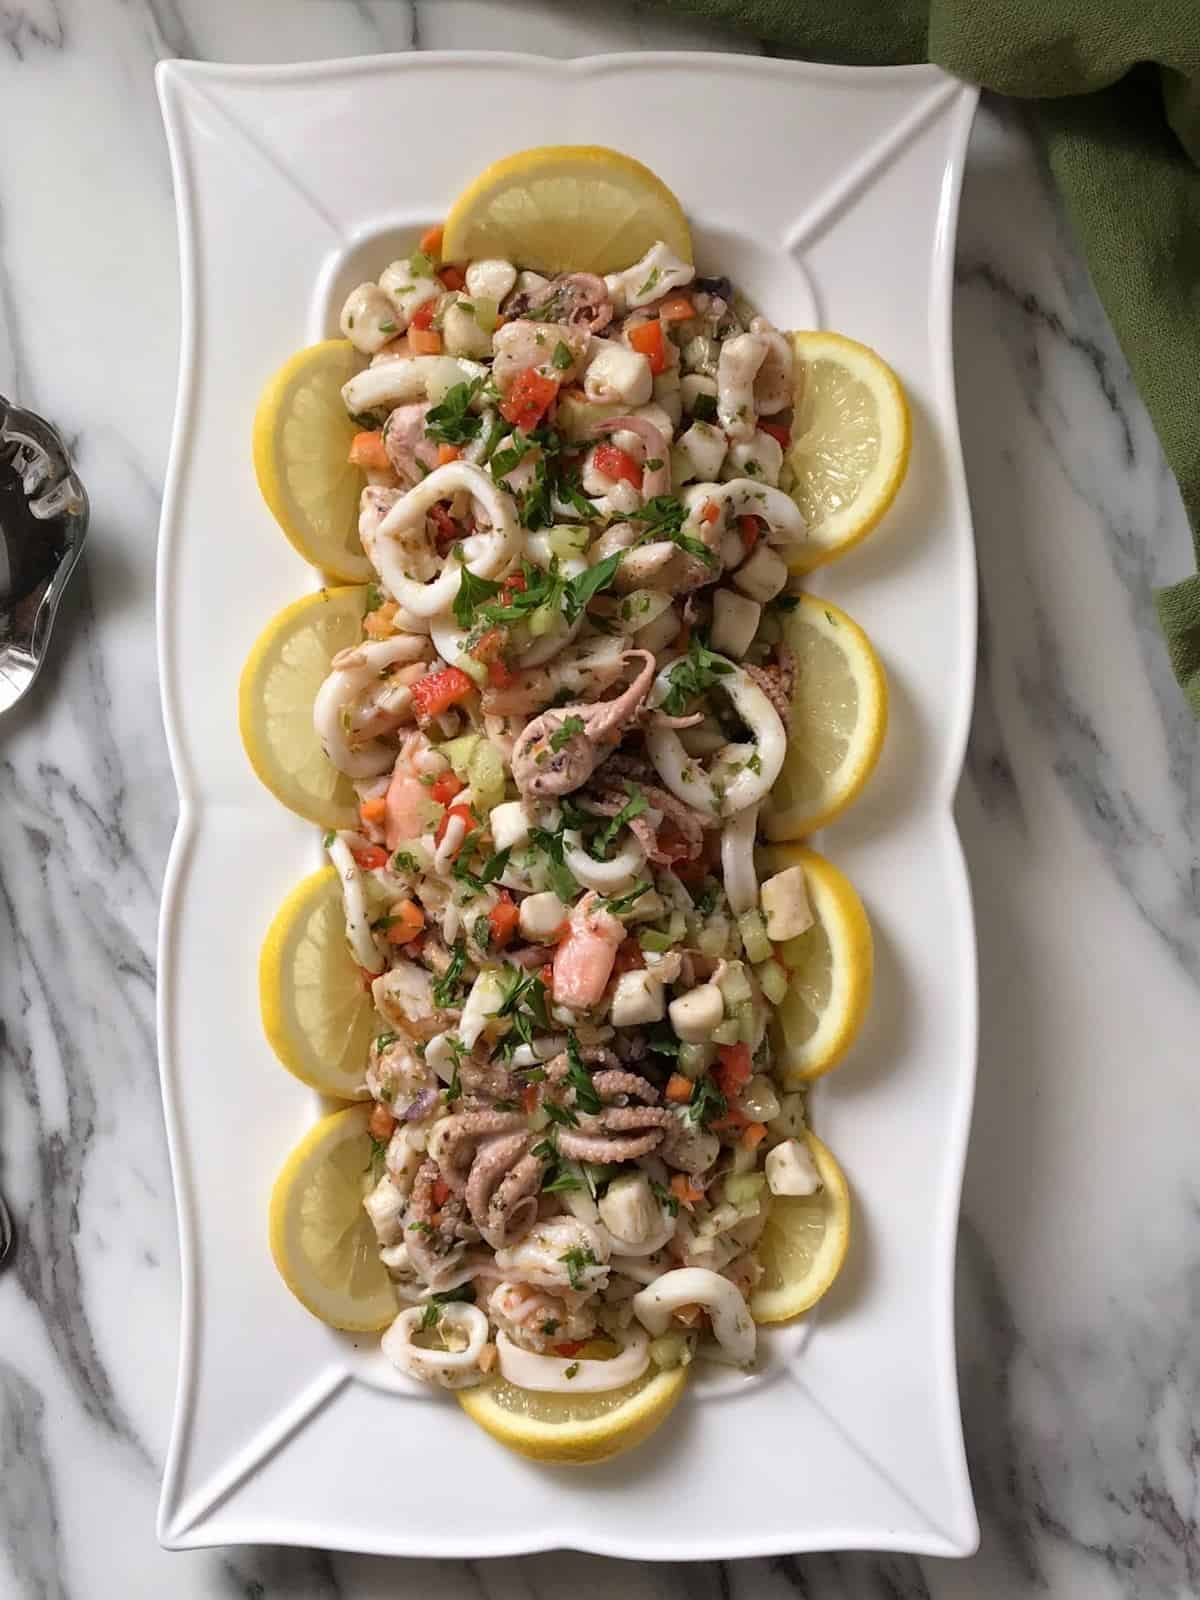 The seafood salad is served in a white dish.